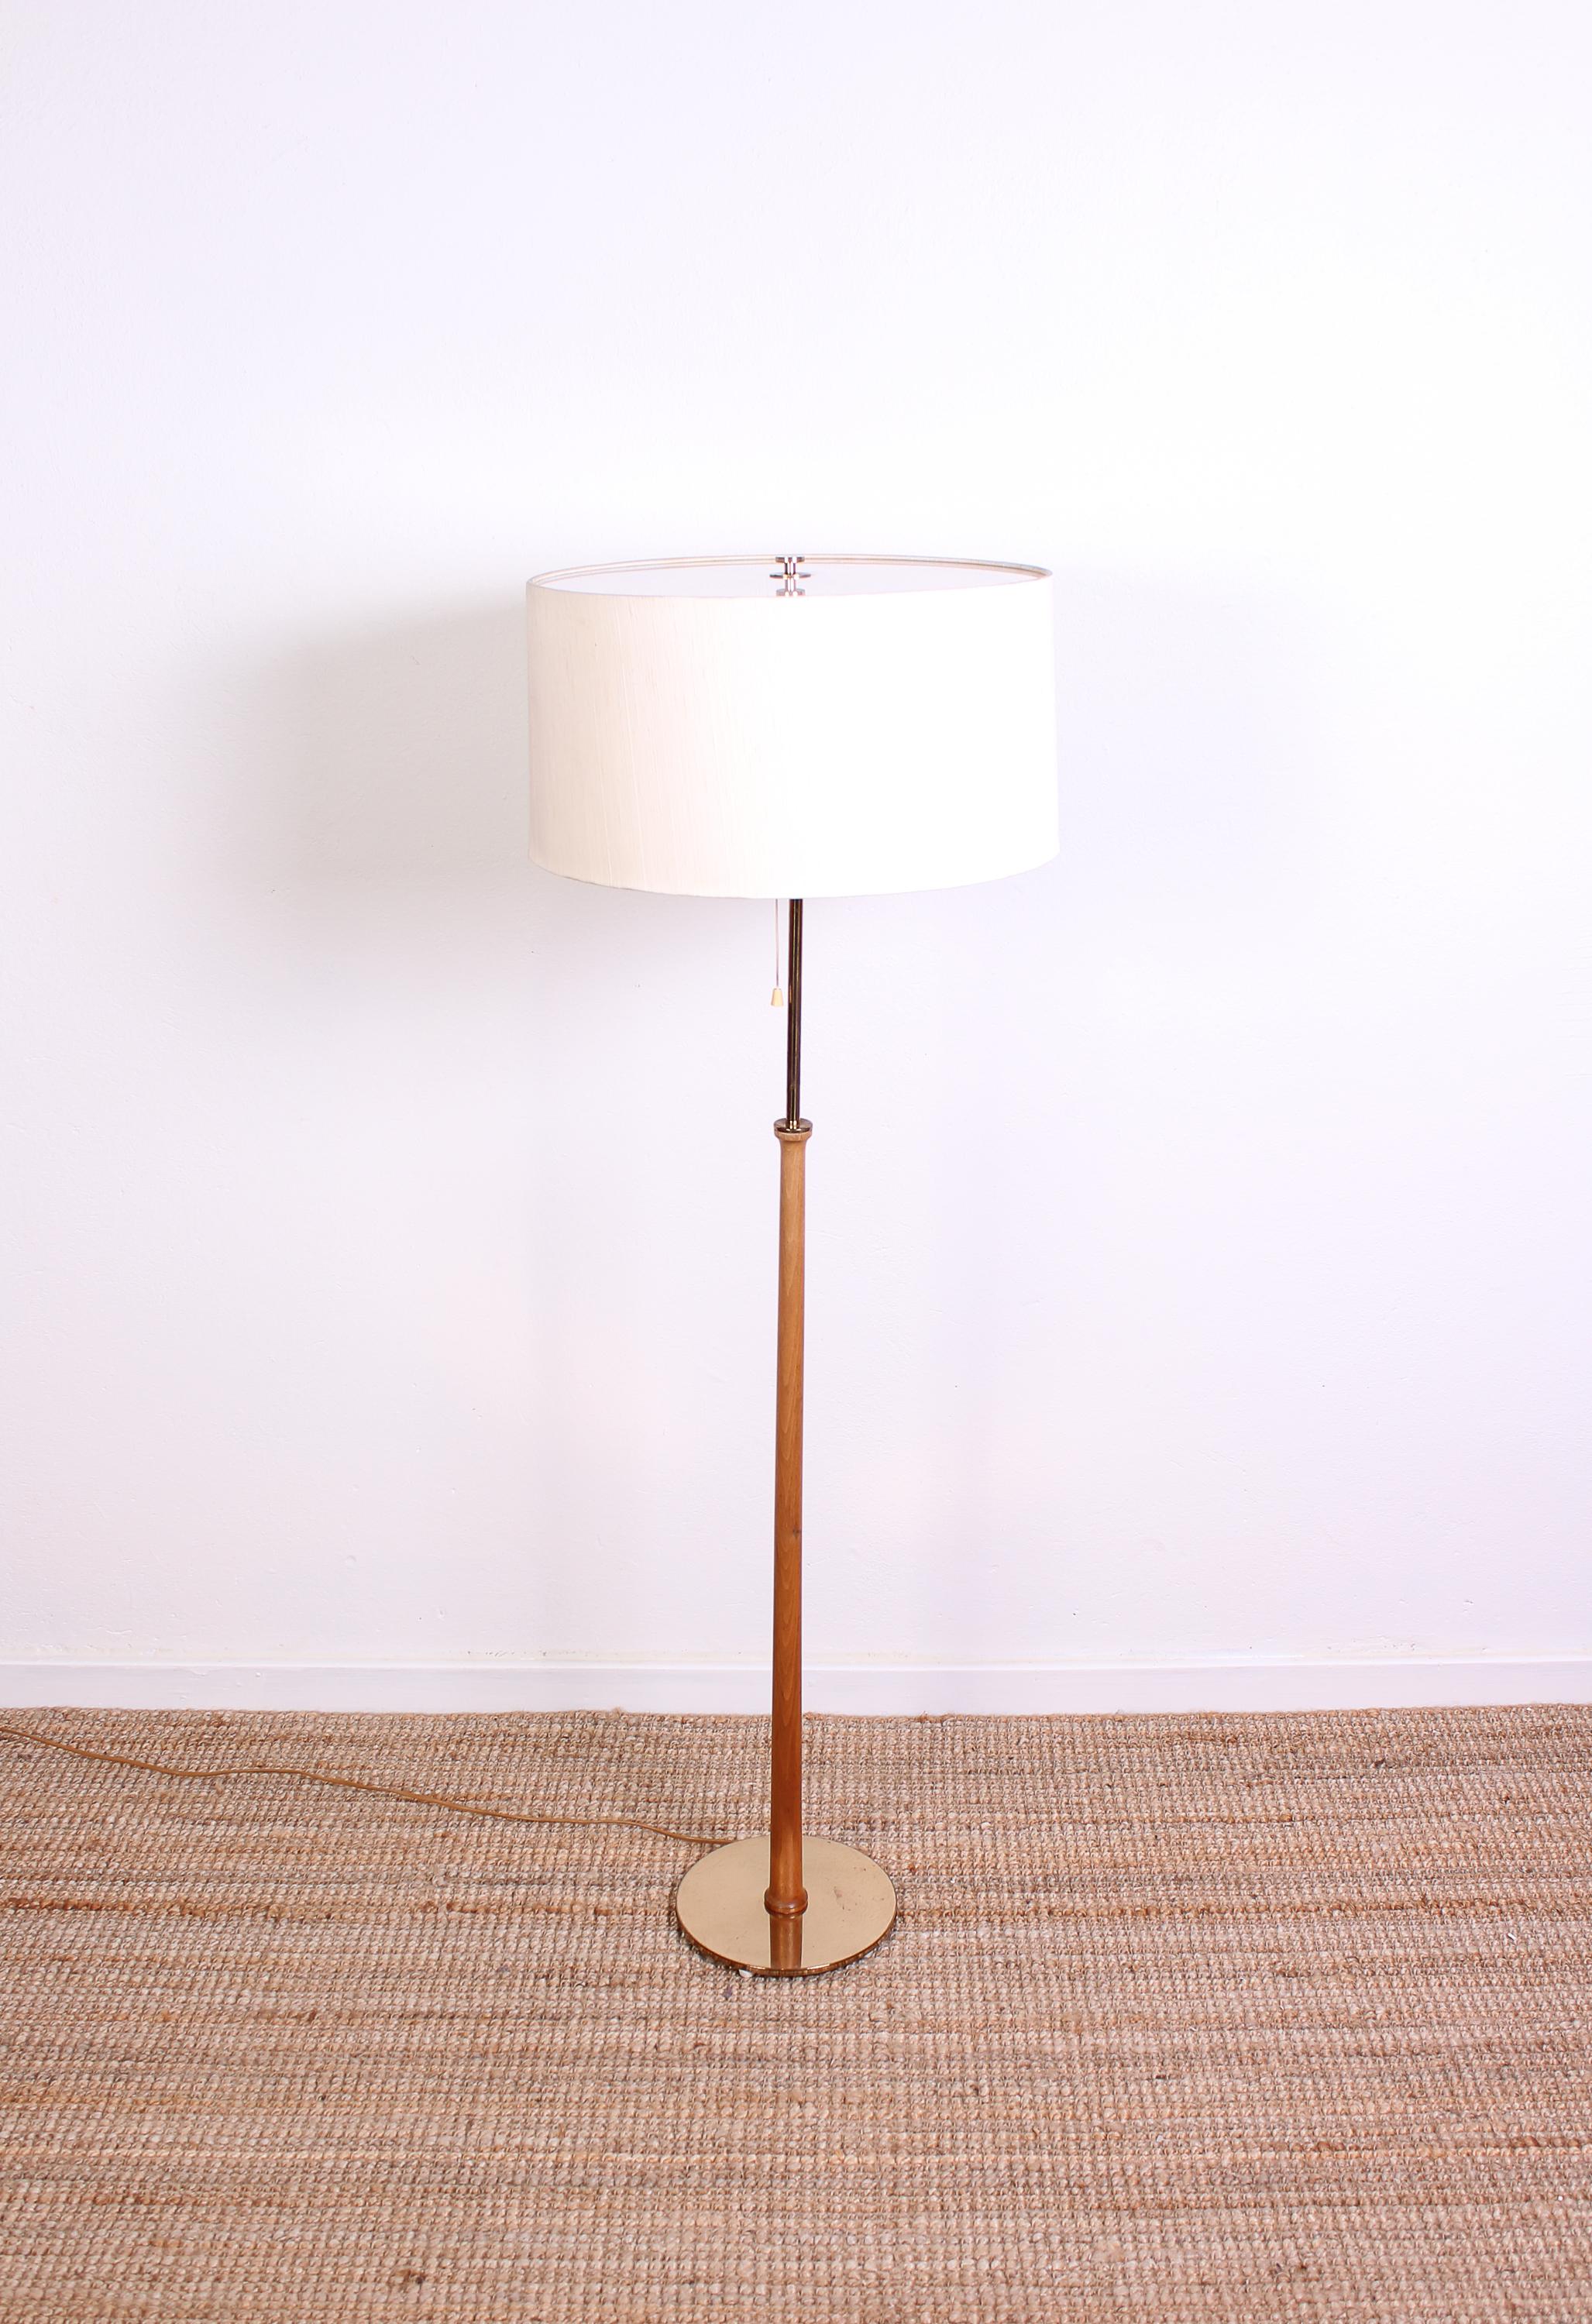 A midcentury floor lamp of high quality by Swedish manufacturer Bergboms. The lamp is made out of brass and teak with its original shade. Good vintage condition with signs of usage consistent with age.